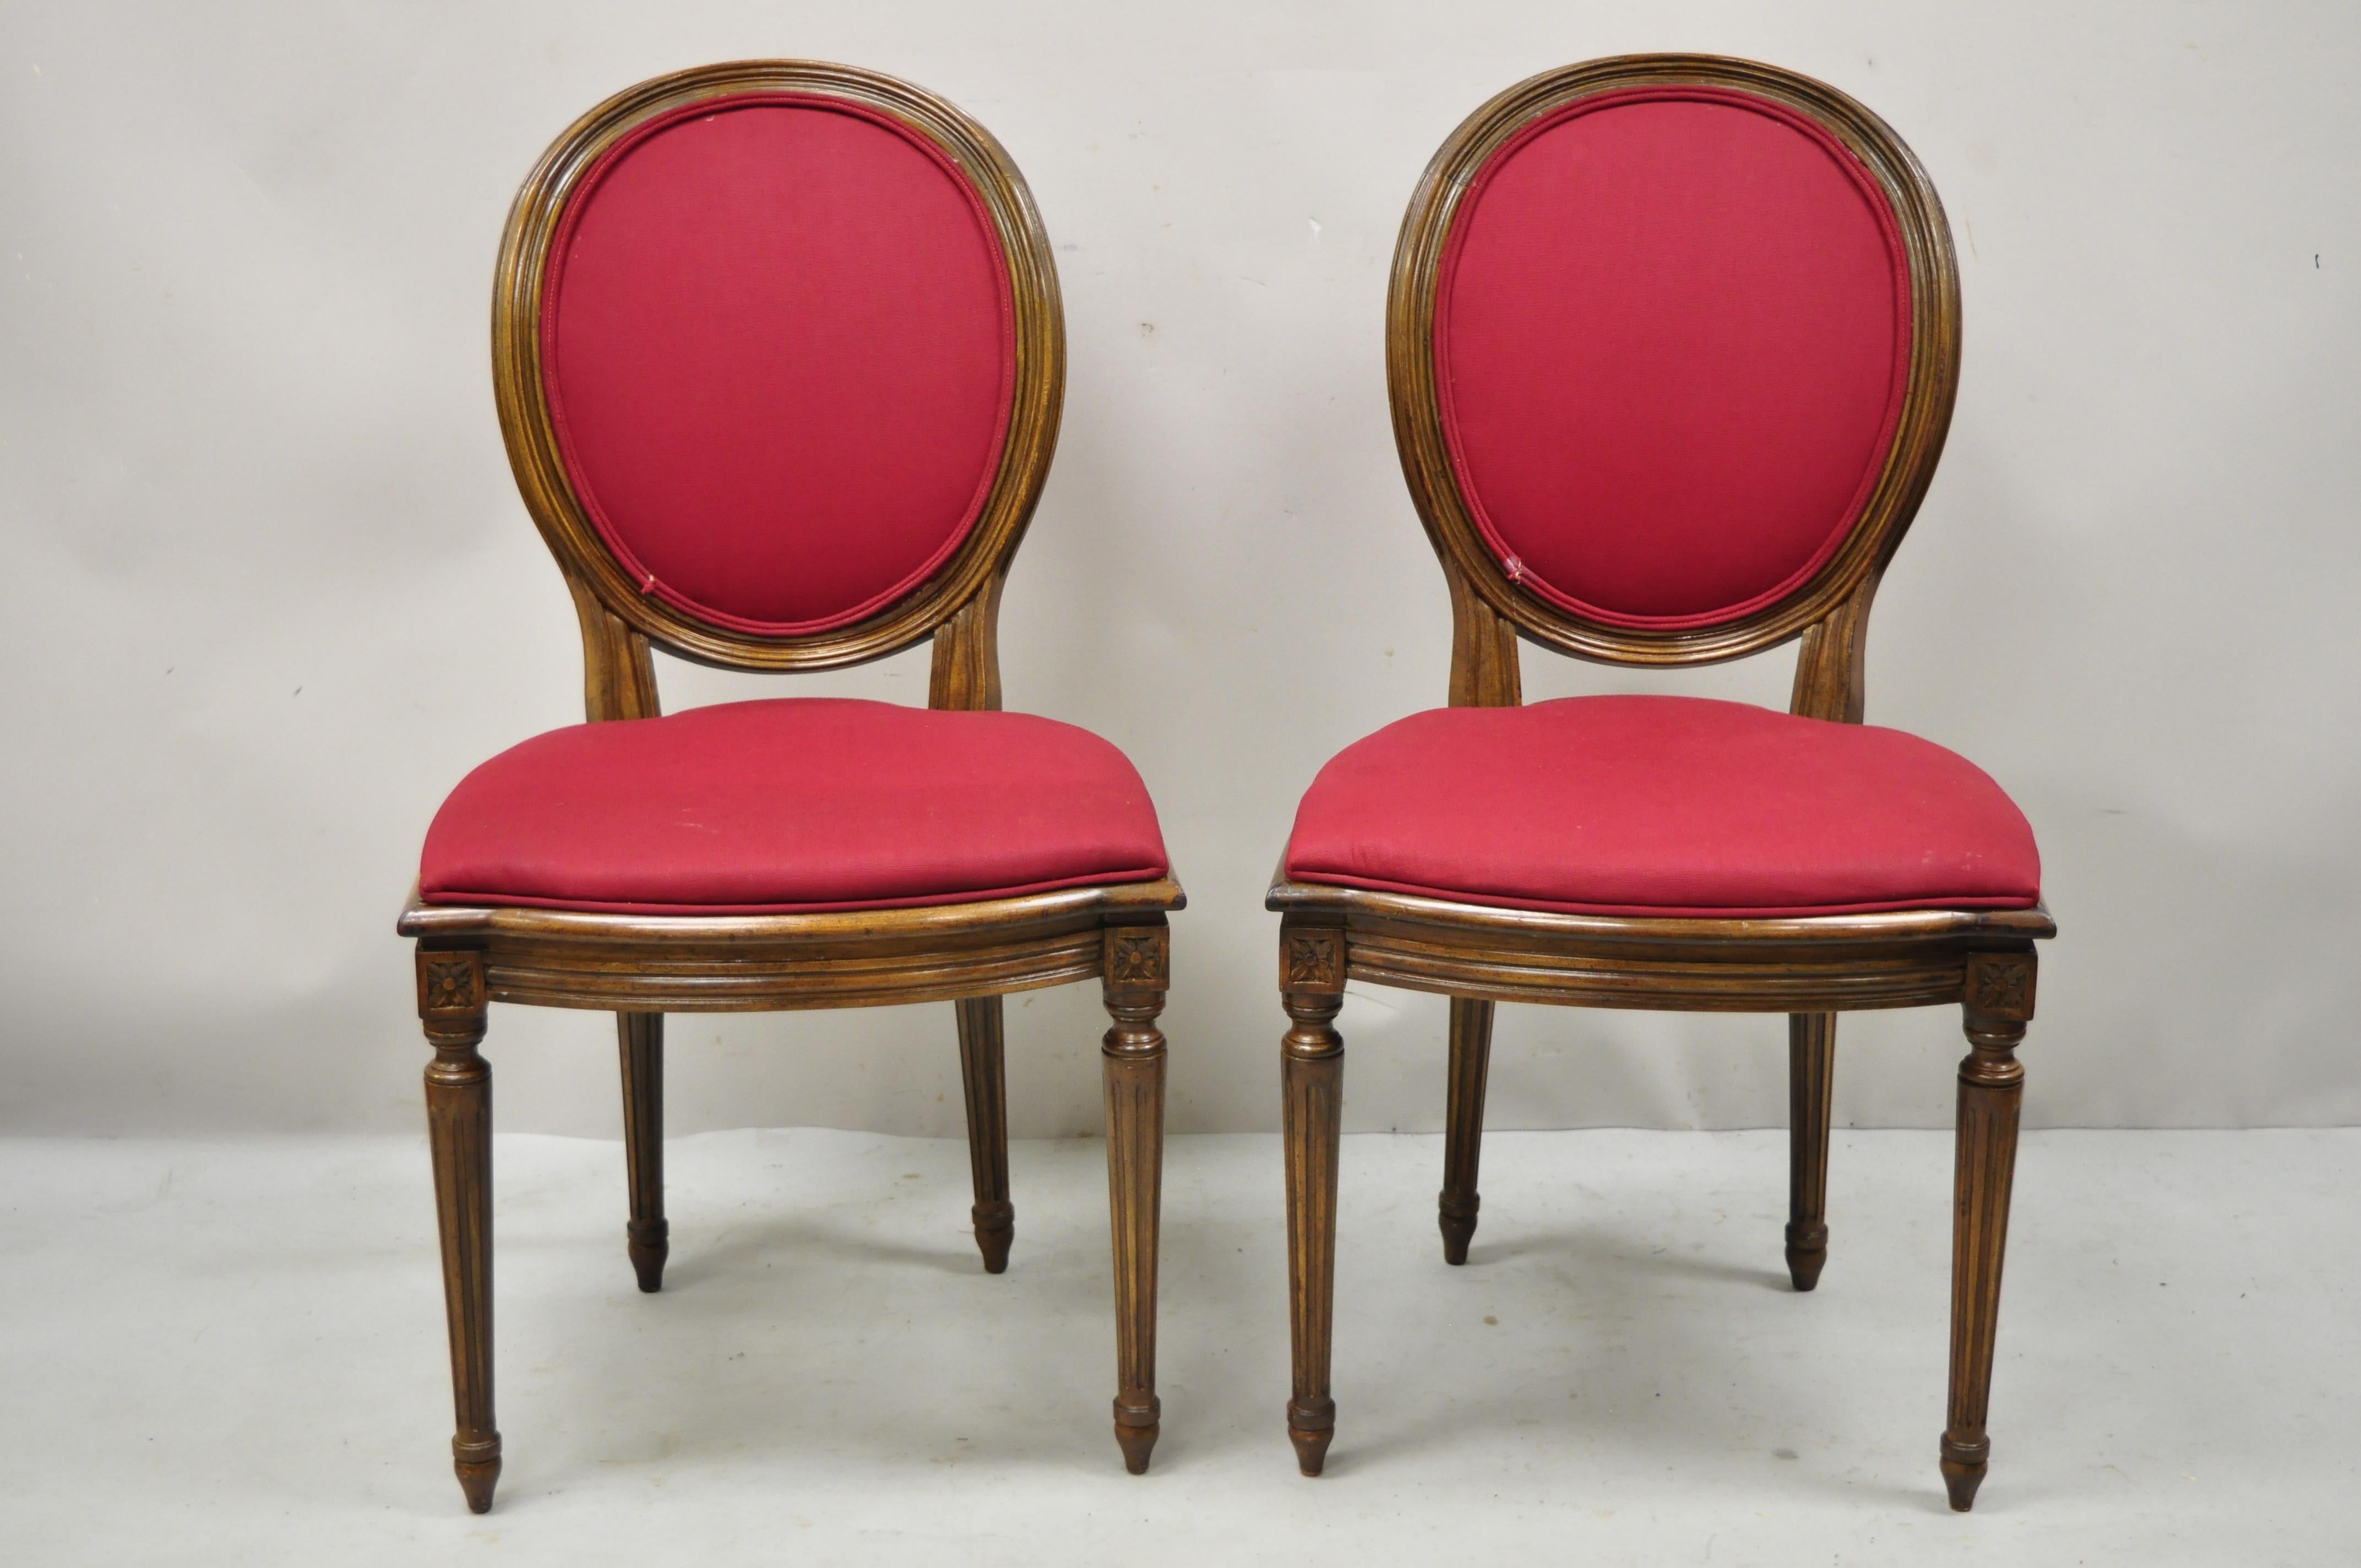 Vintage French Louis XVI Style Oval Cameo Back Red Dining Room Chairs - Set of 6. Item features (6) side chairs, oval medallion backs, solid wood frames, distressed finish, tapered legs, very nice vintage set, quality craftsmanship, great style and